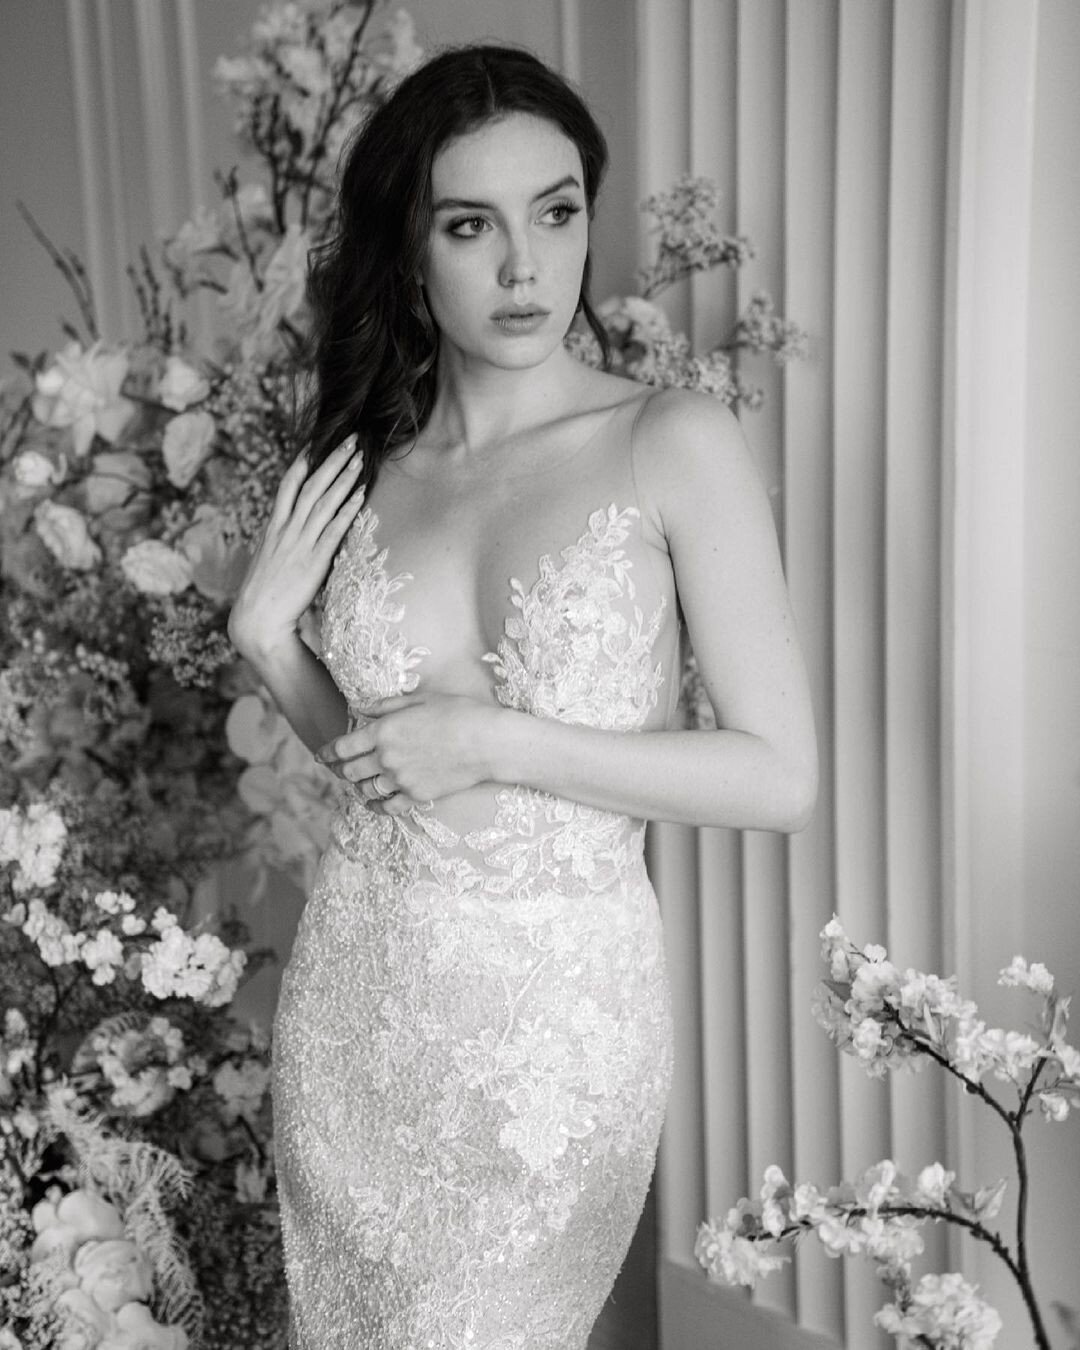 A little bit of lace...A LOT of drama 😎🌙
Would you saunter down the aisle in &quot;Sanibel&quot;?

Credit:
photography: @aseaoflove 
hmua: @helloflawlessartistry 
florist: @billieballco 
nails: @sarahnailsit